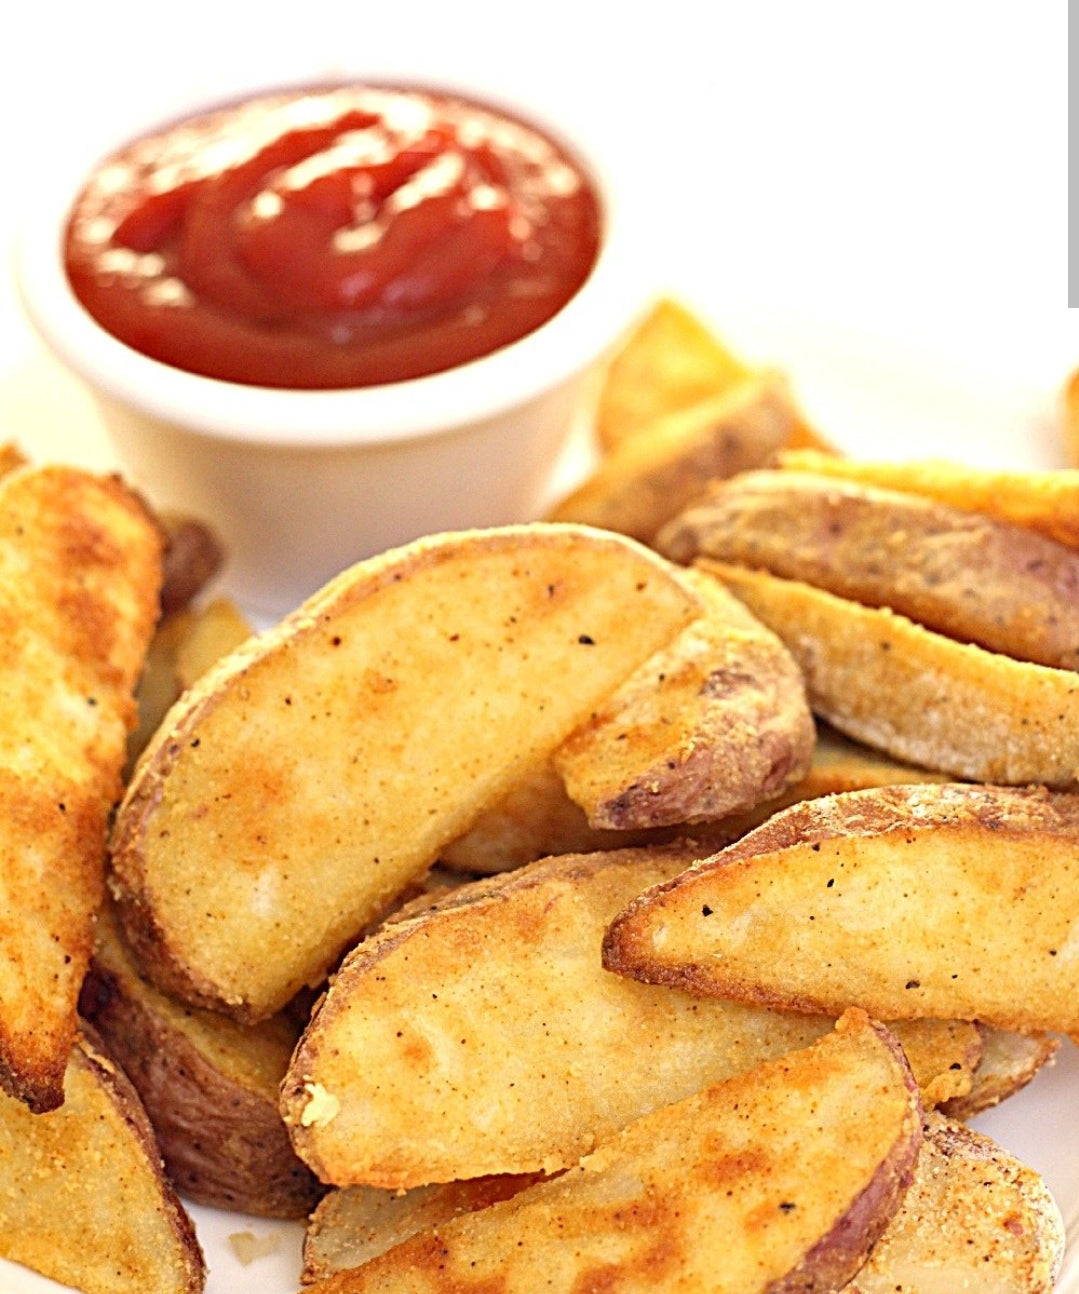 French Fry Potato wedges